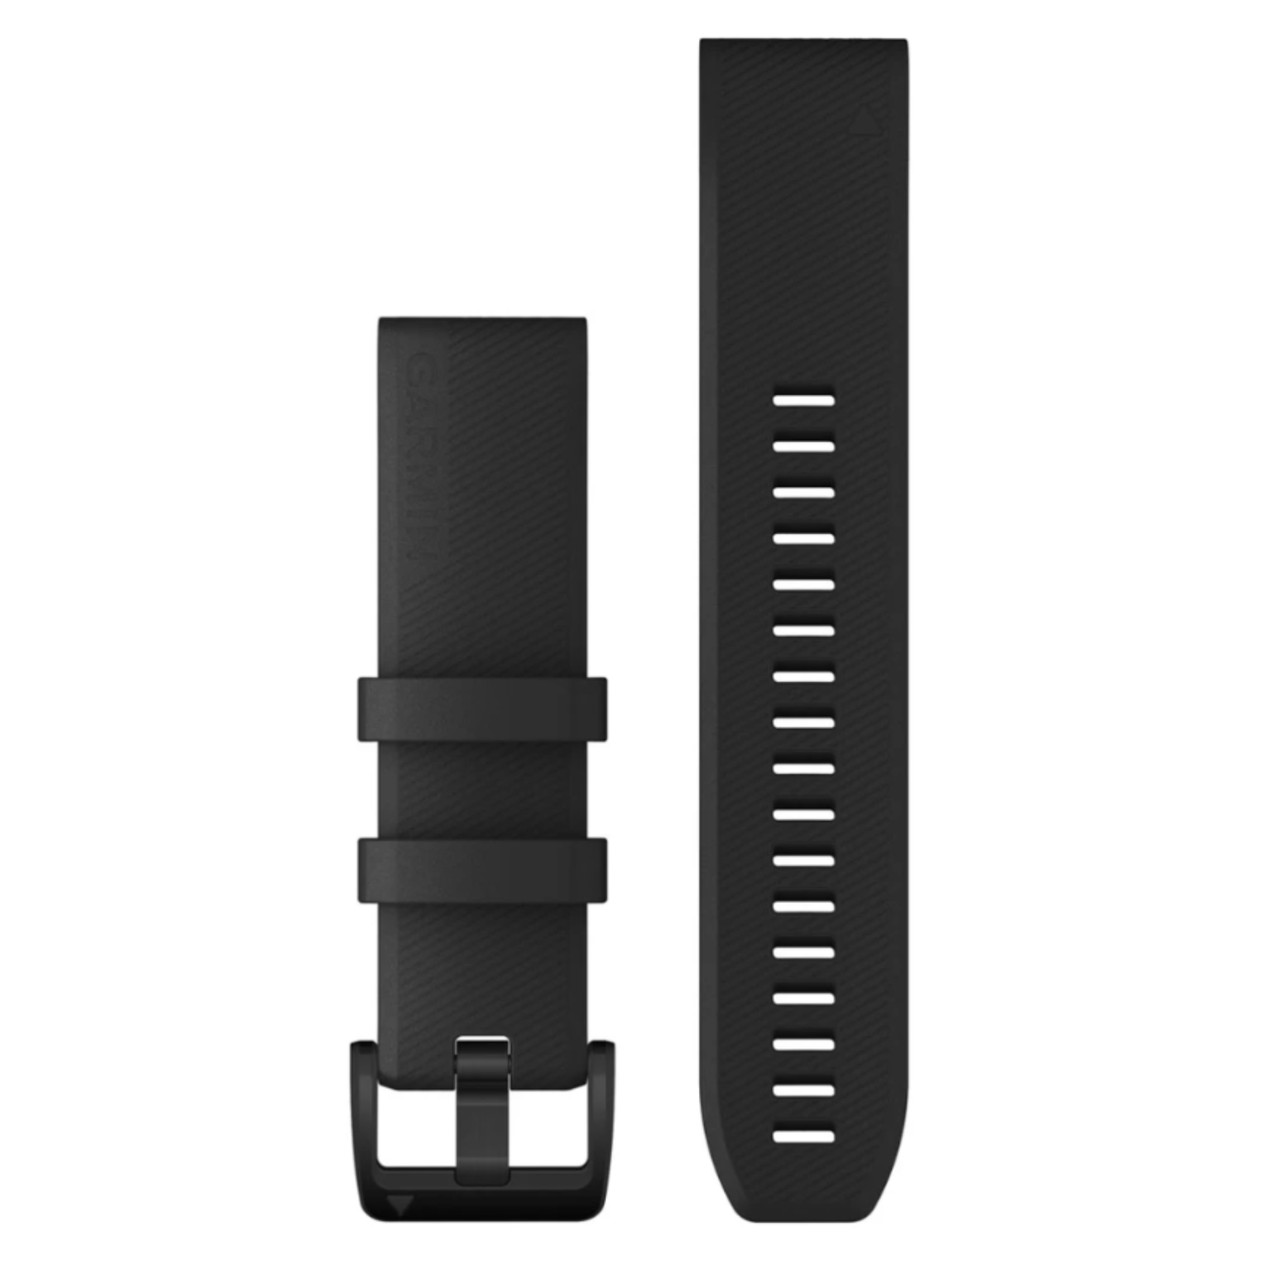 Garmin New OEM QuickFit® 22 Watch Bands Black with Black Stainless Steel Hardware, 010-12901-00